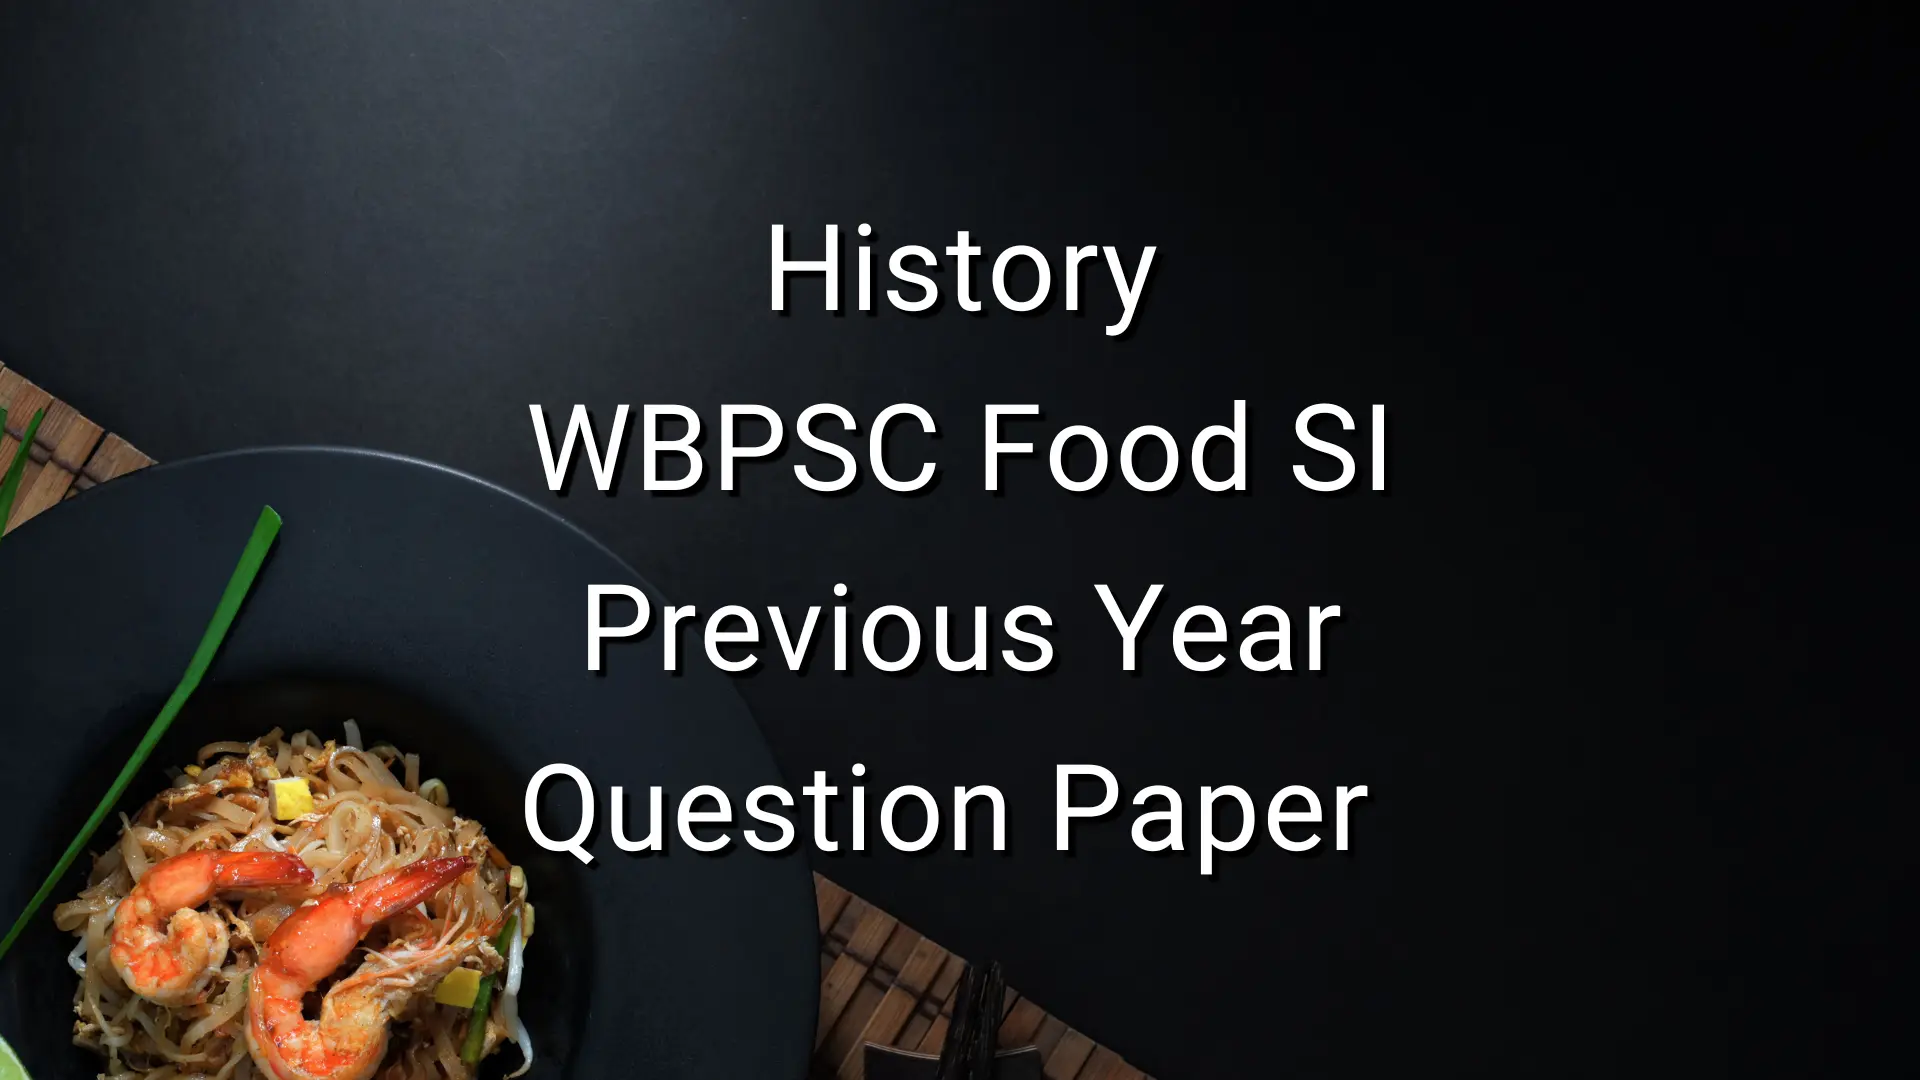 History WBPSC Food SI Previous Year Question Paper